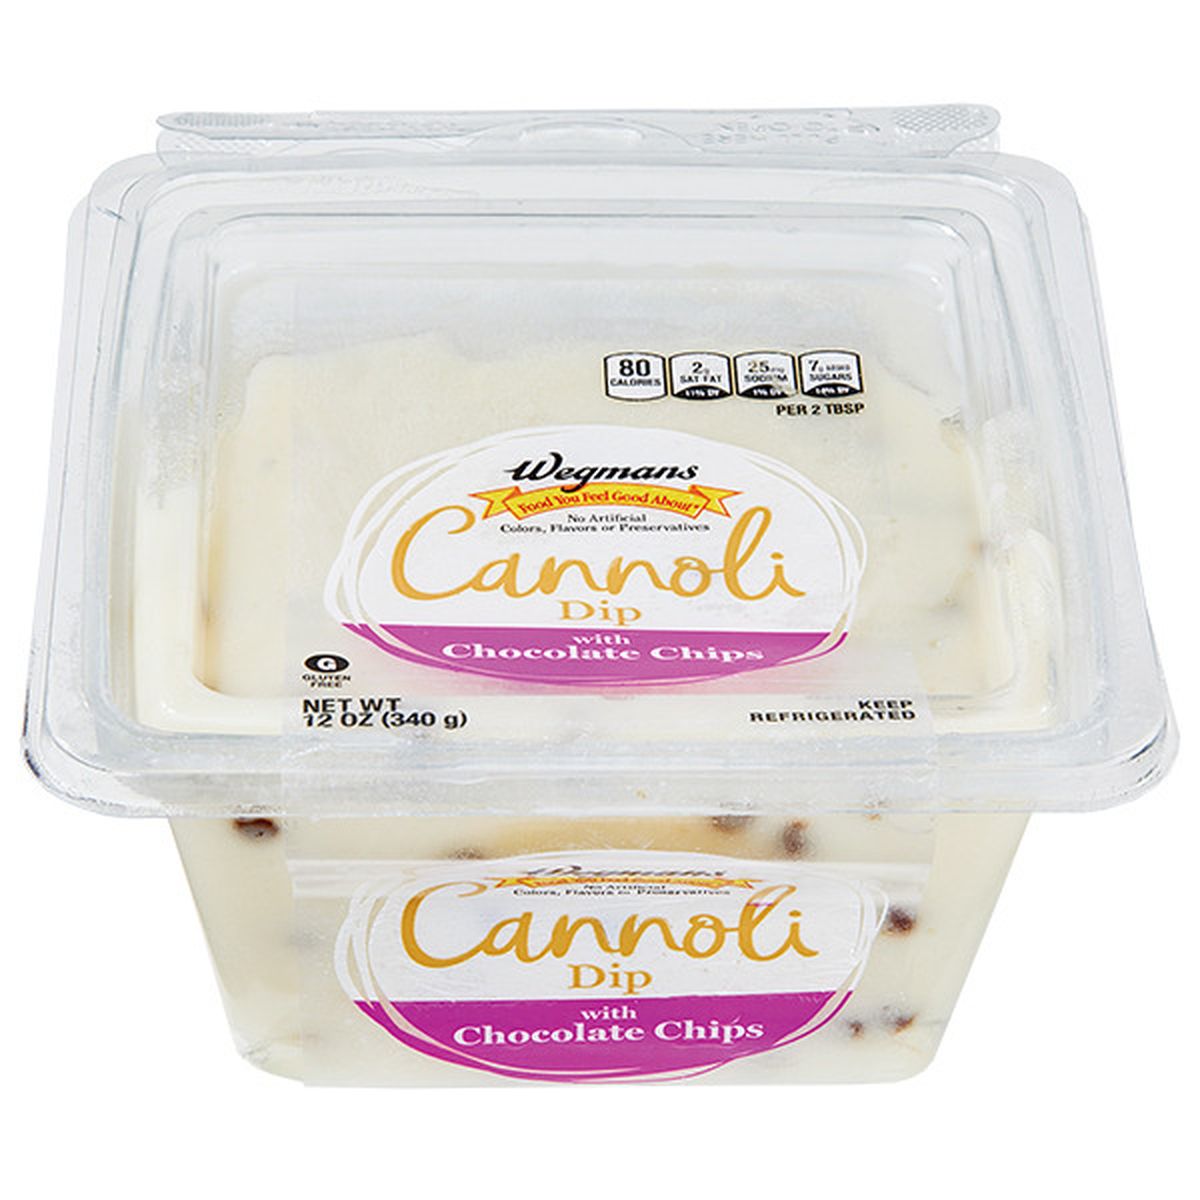 Calories in Wegmans Cannoli Dip with Chocolate Chips